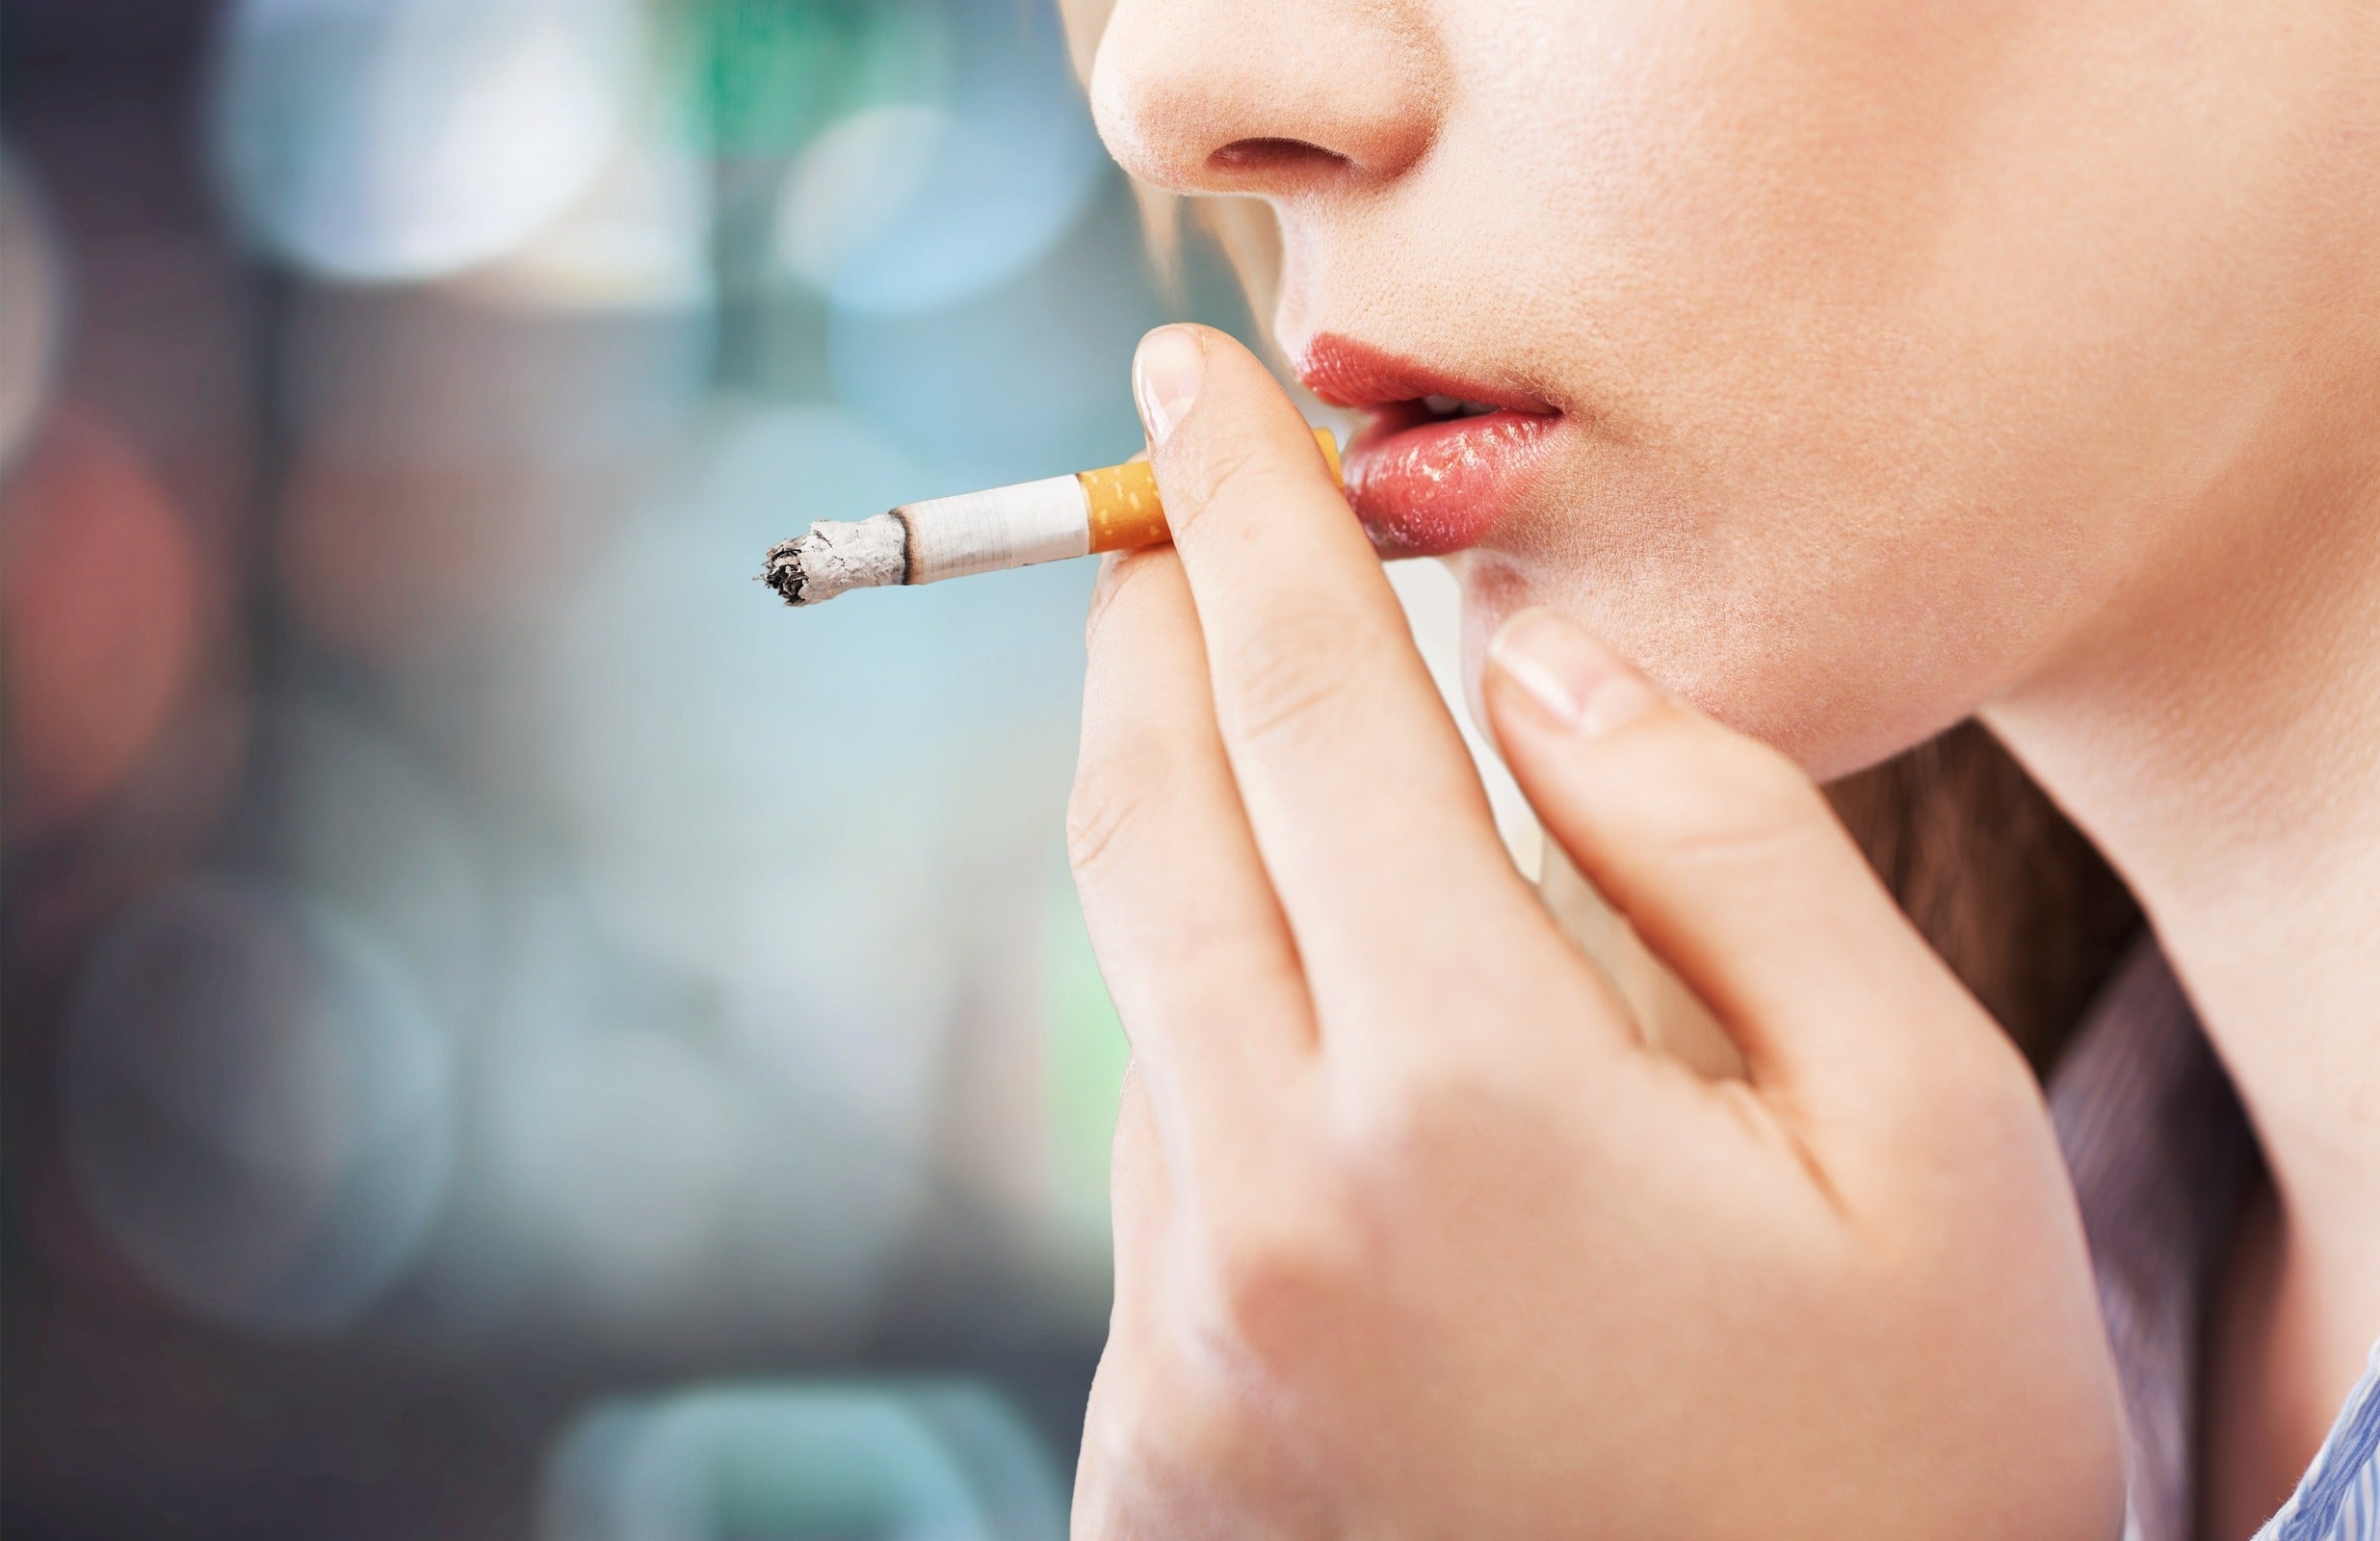 11 Risks of Smoking After Lip Injections